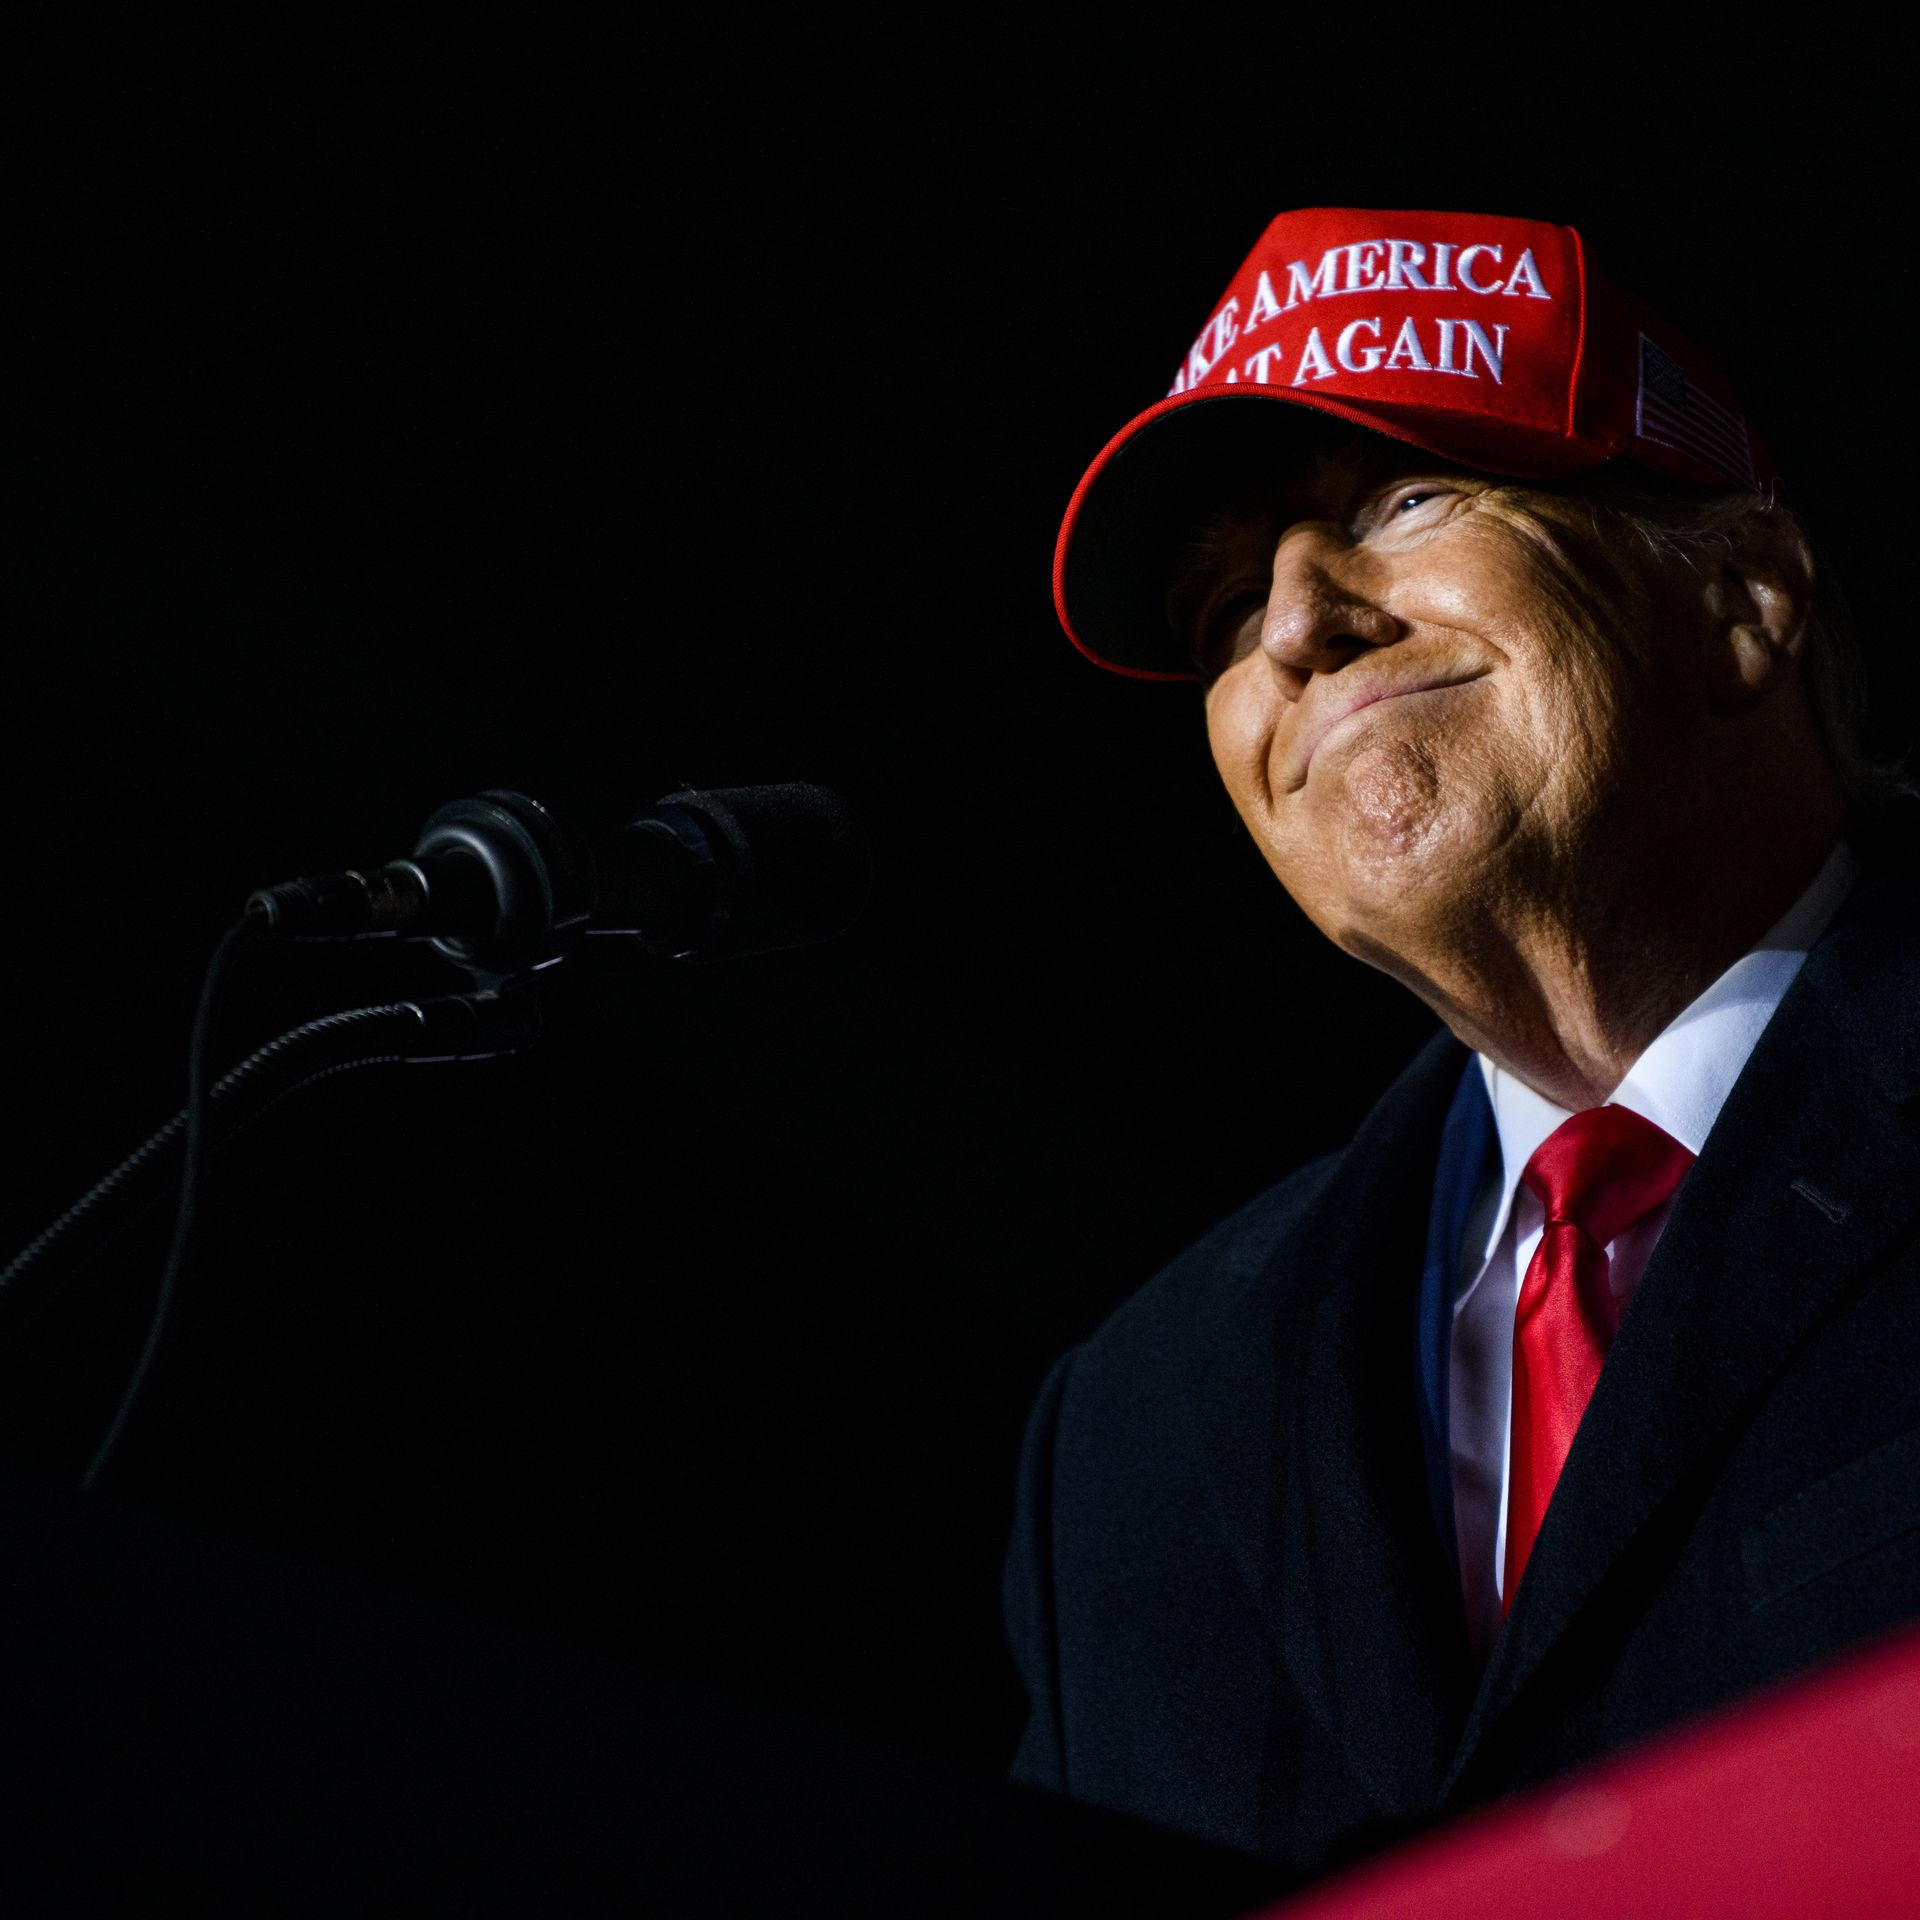 President Trump smiles while wearing a MAGA hat at a rally. 